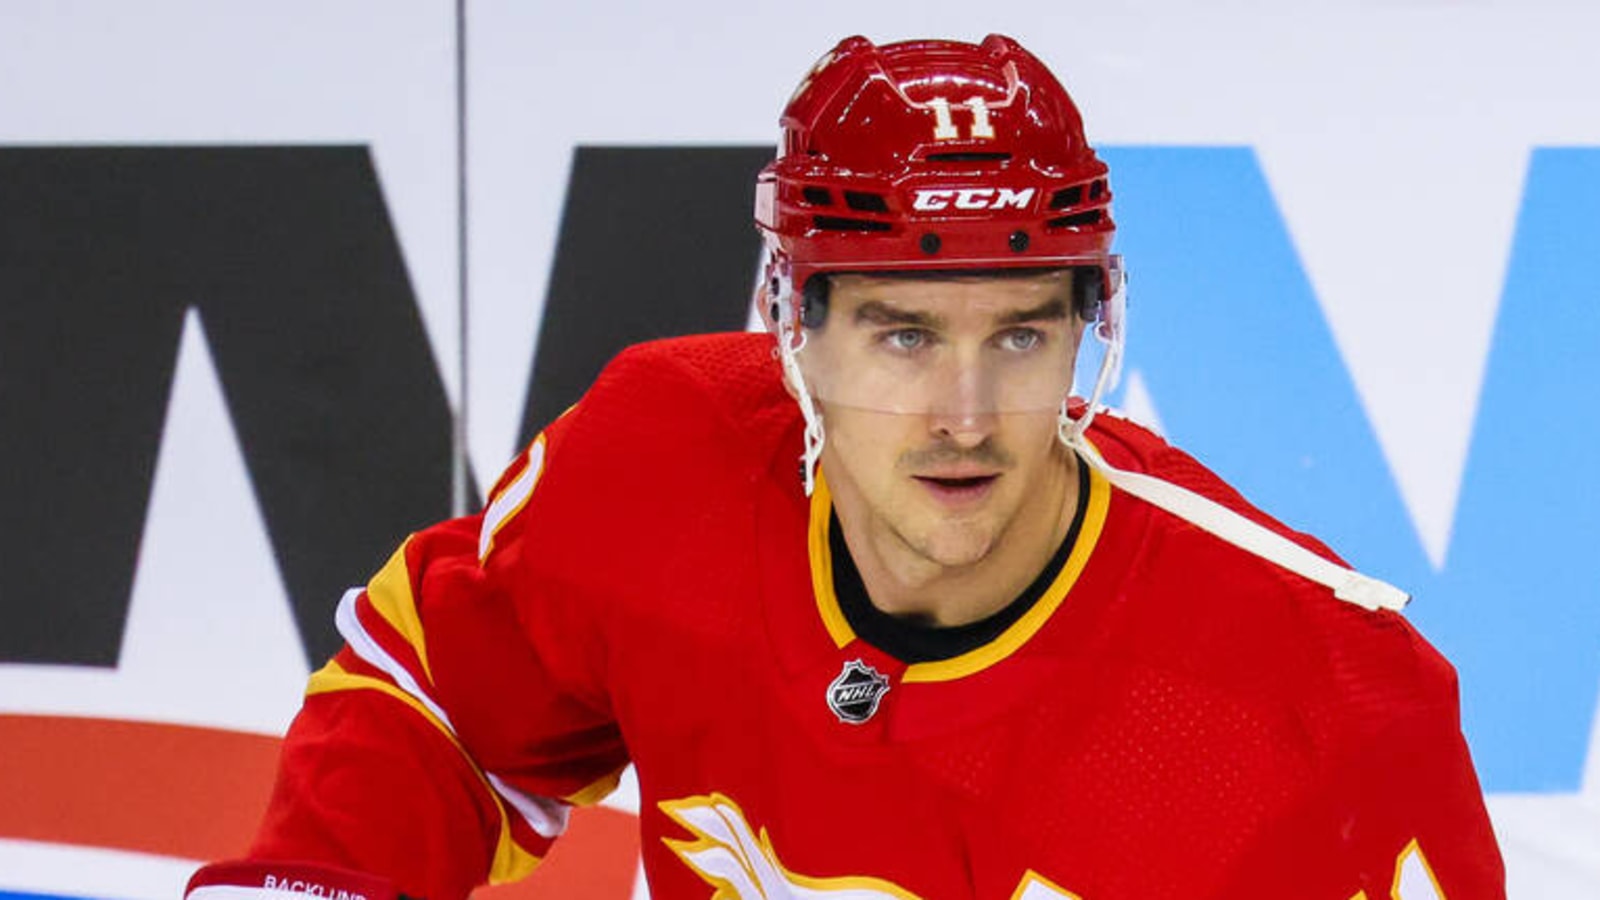 Flames' Backlund wins King Clancy Memorial Trophy